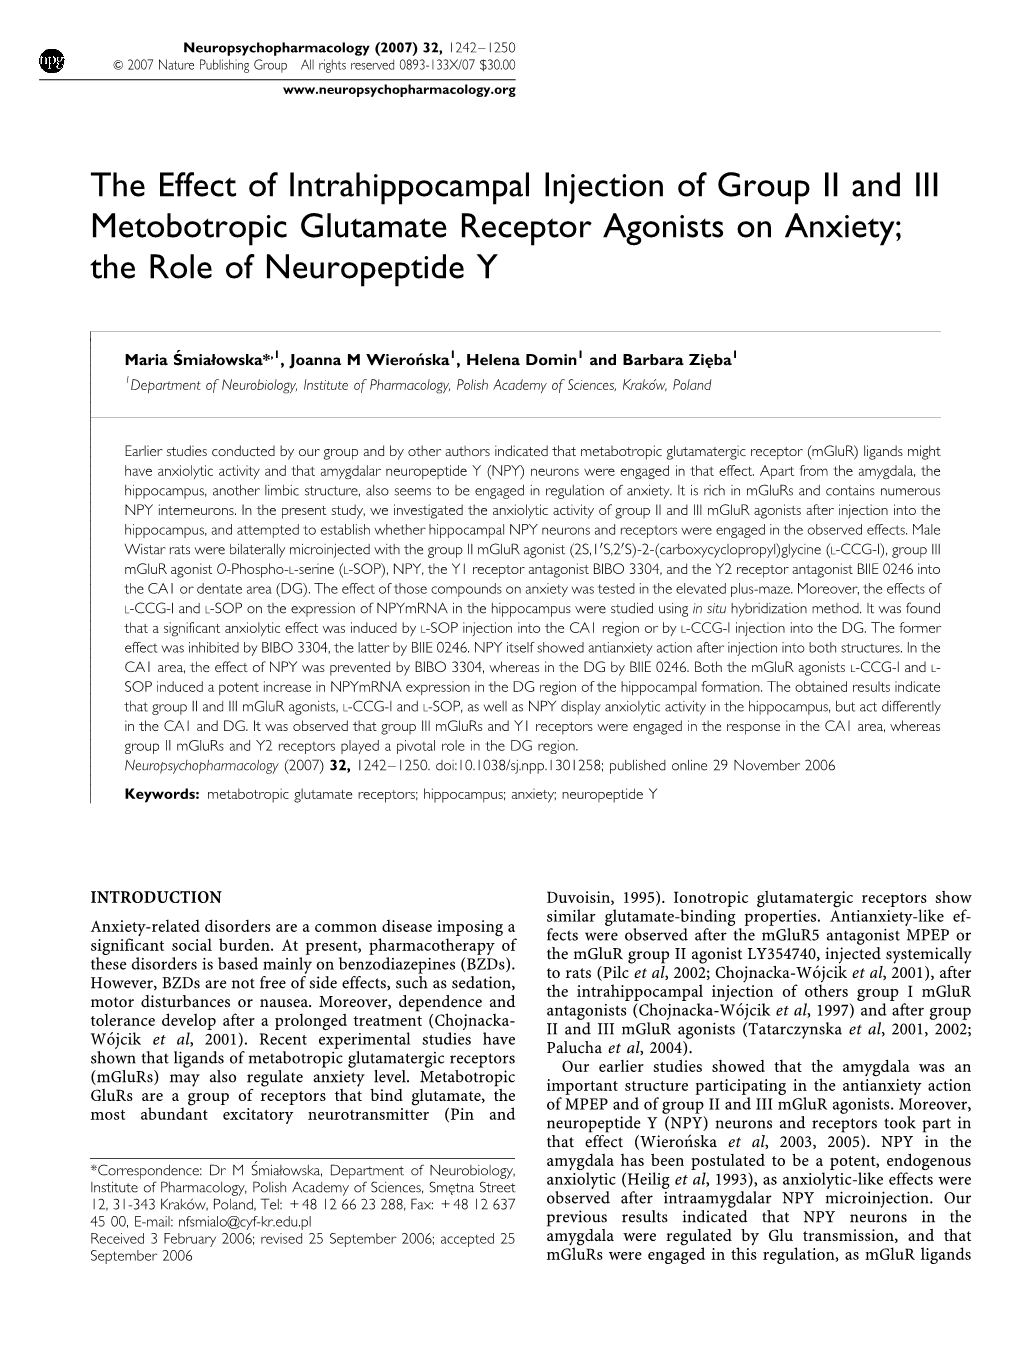 The Effect of Intrahippocampal Injection of Group II and III Metobotropic Glutamate Receptor Agonists on Anxiety; the Role of Neuropeptide Y